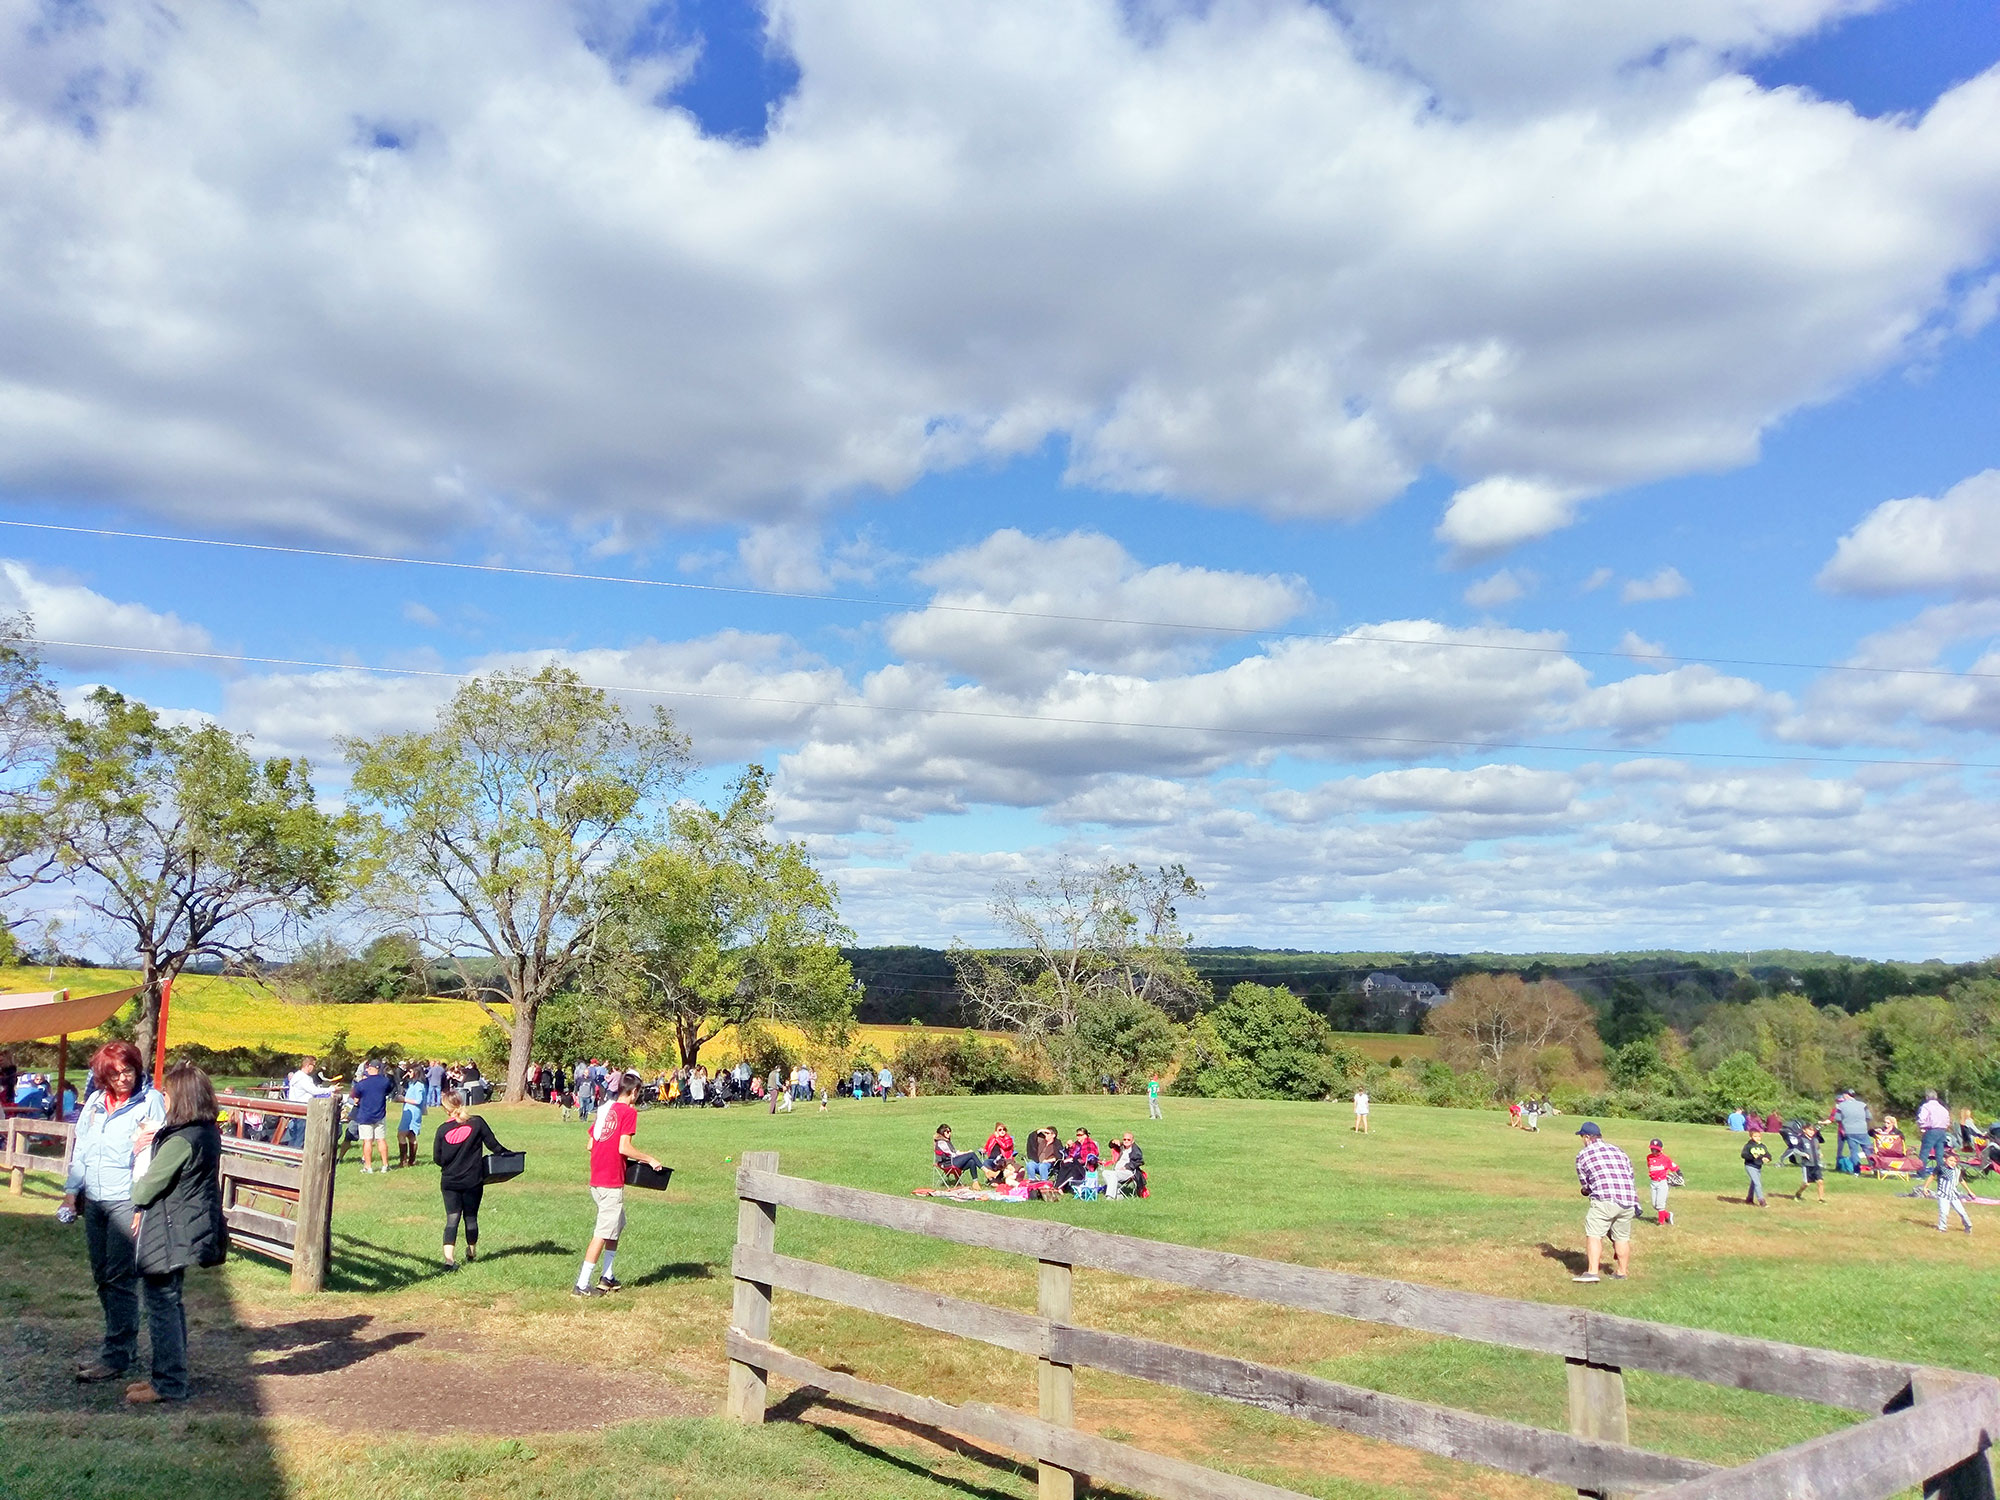 Kids playing in the outdoor areas of Quattro Goombas Winery in Middleburg, Virginia